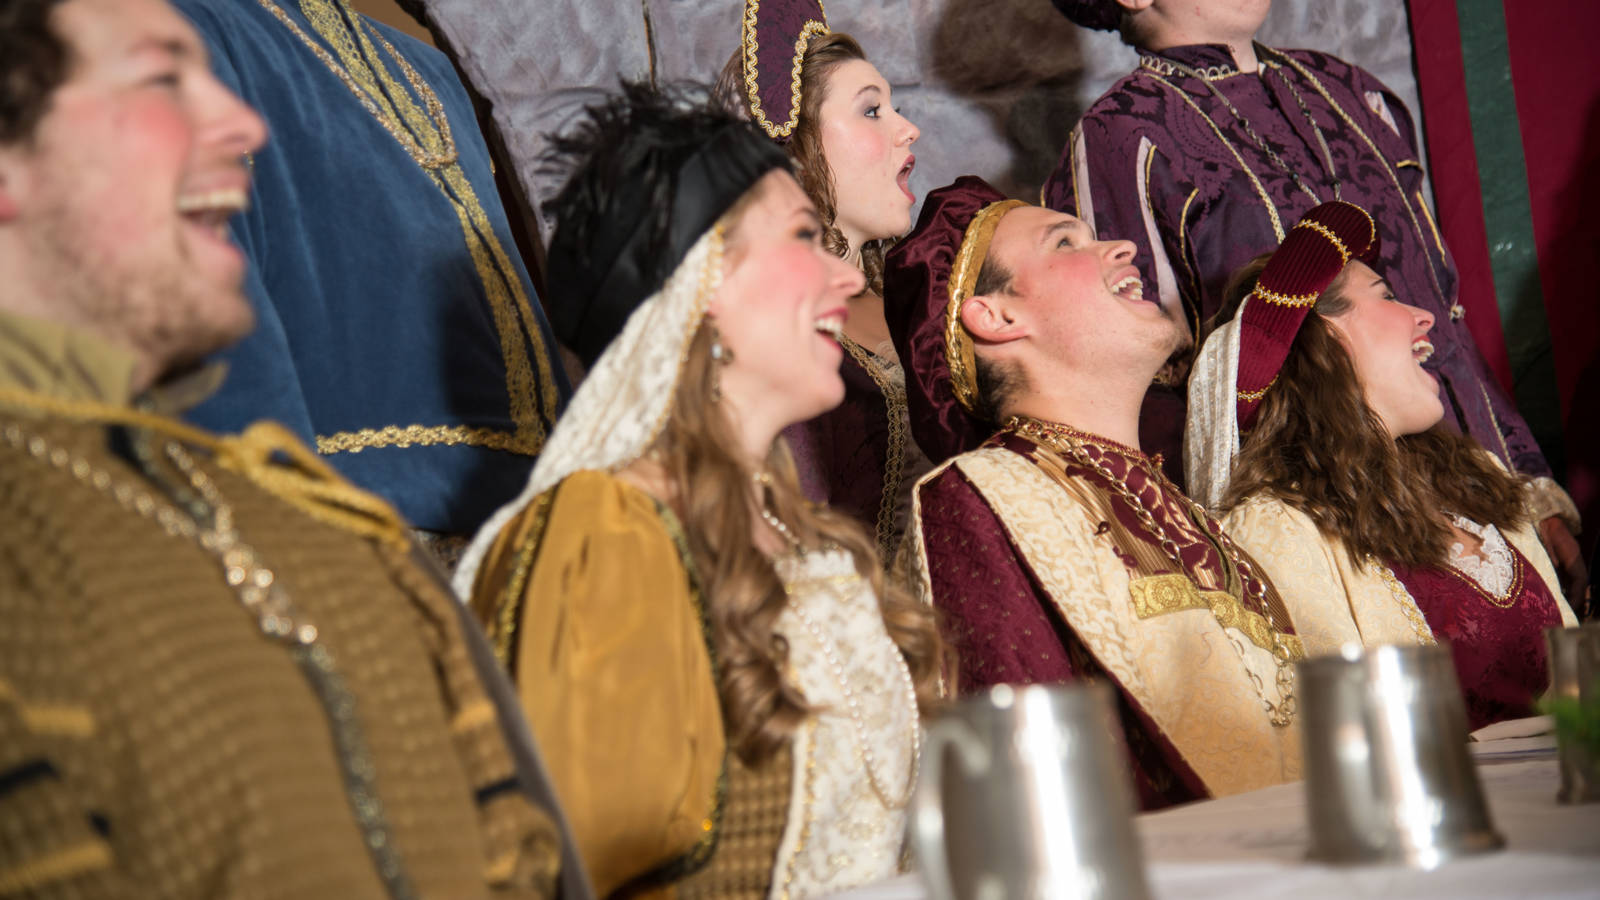 Members of the Ye Olde Madrigal Dinner laughing around the dinner table.